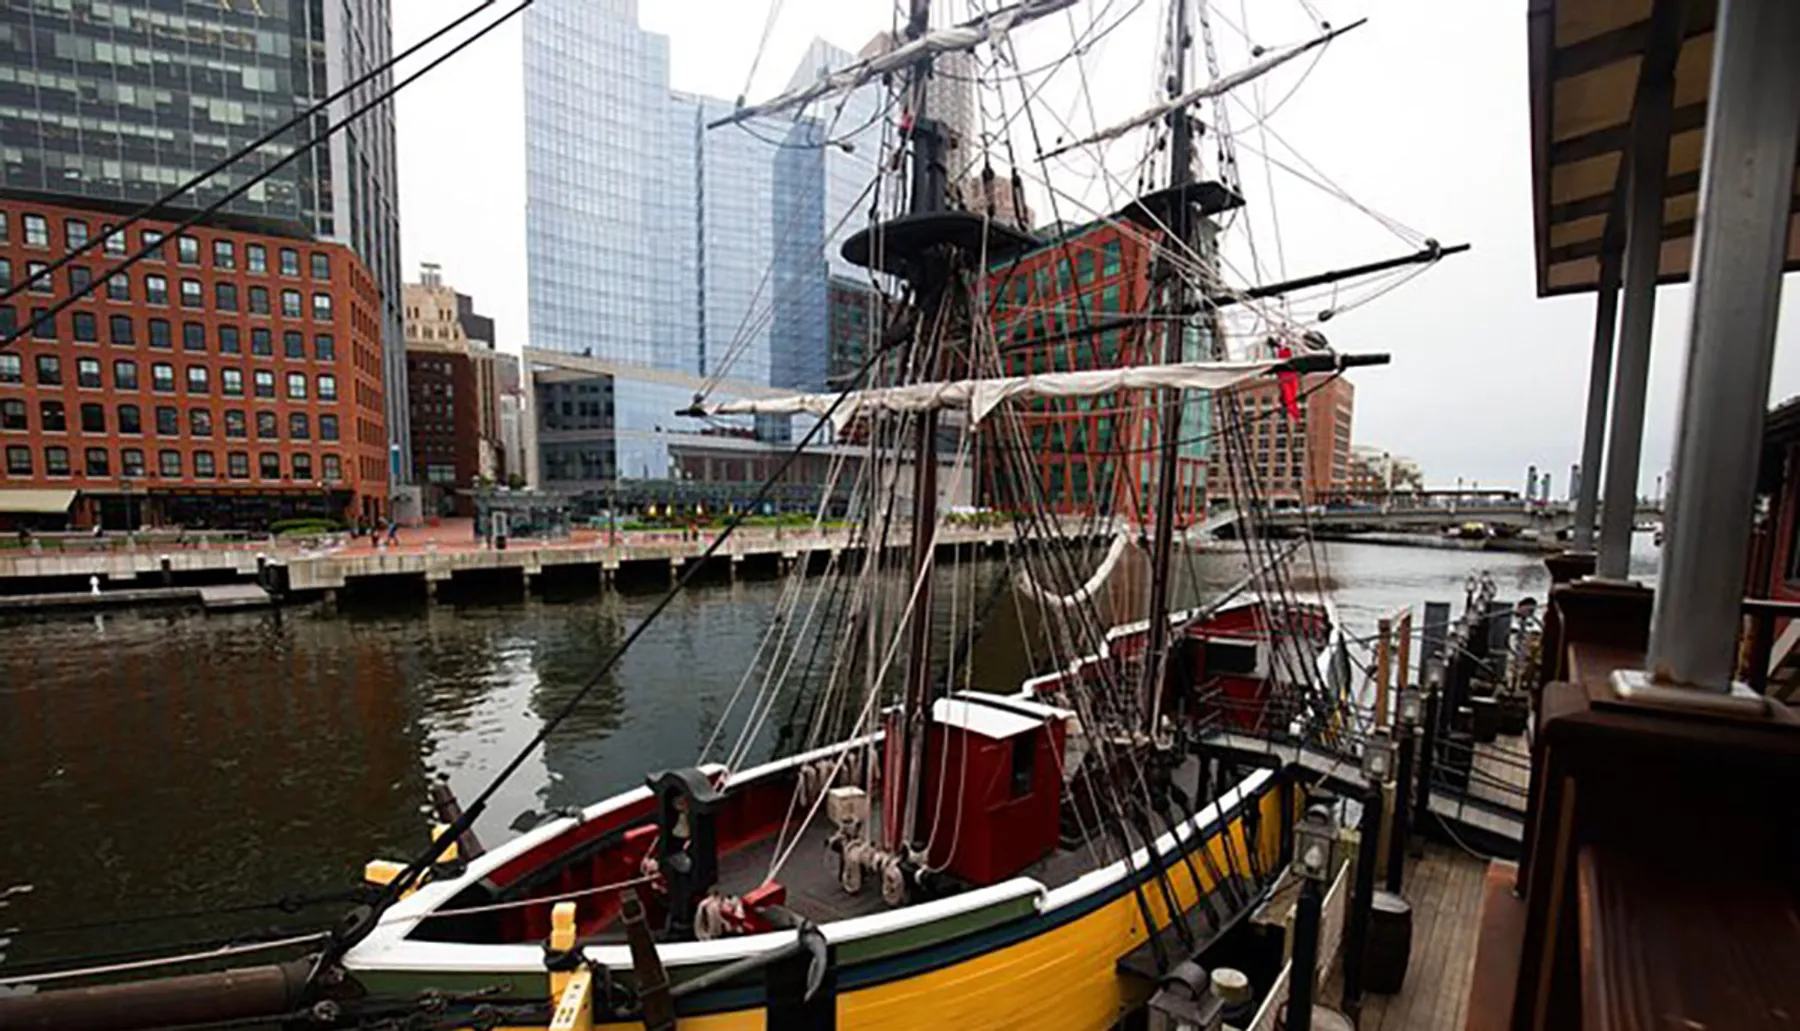 A historical tall ship is docked in a modern urban waterfront setting, blending maritime history with contemporary city architecture.